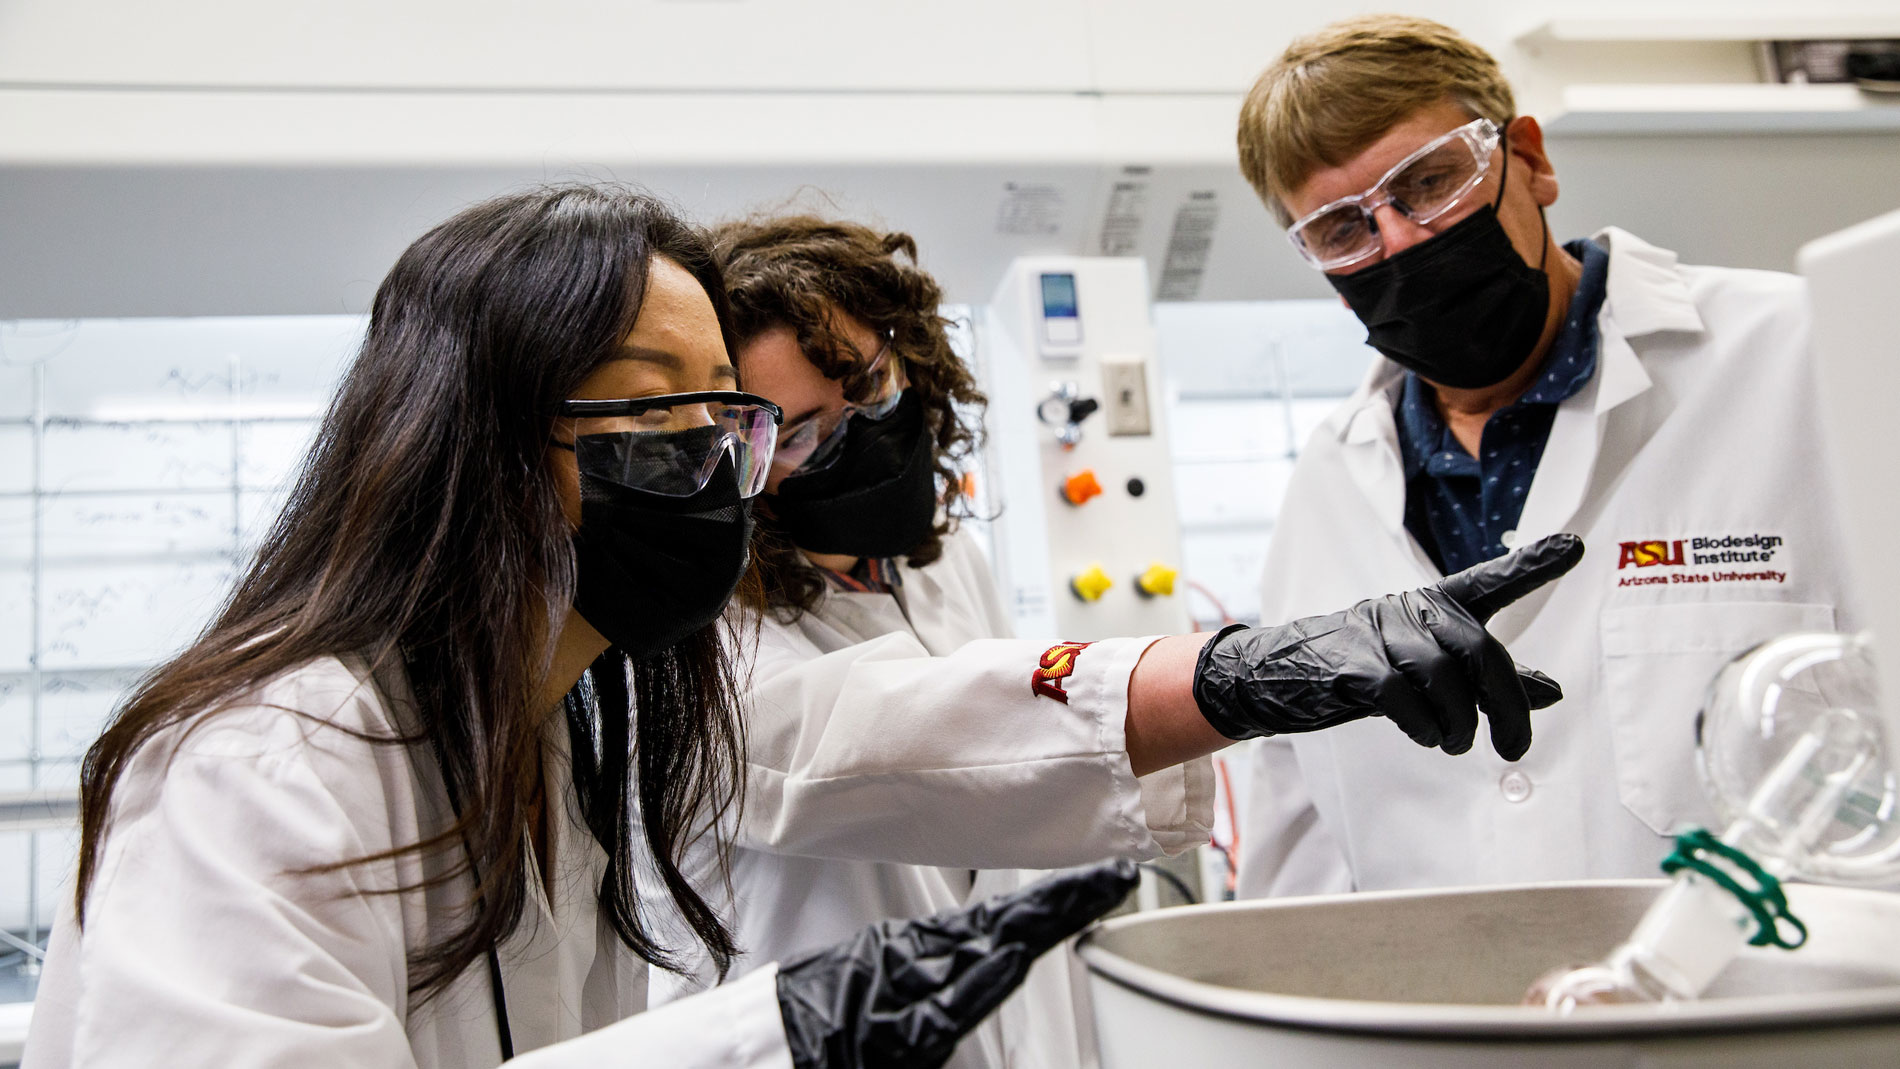 Graduate researchers Boer Liu and Clarissa Westover work with Professor Timothy Long in the ASU Biodesign Center for Sustainable Macromolecular Materials and Manufacturing.